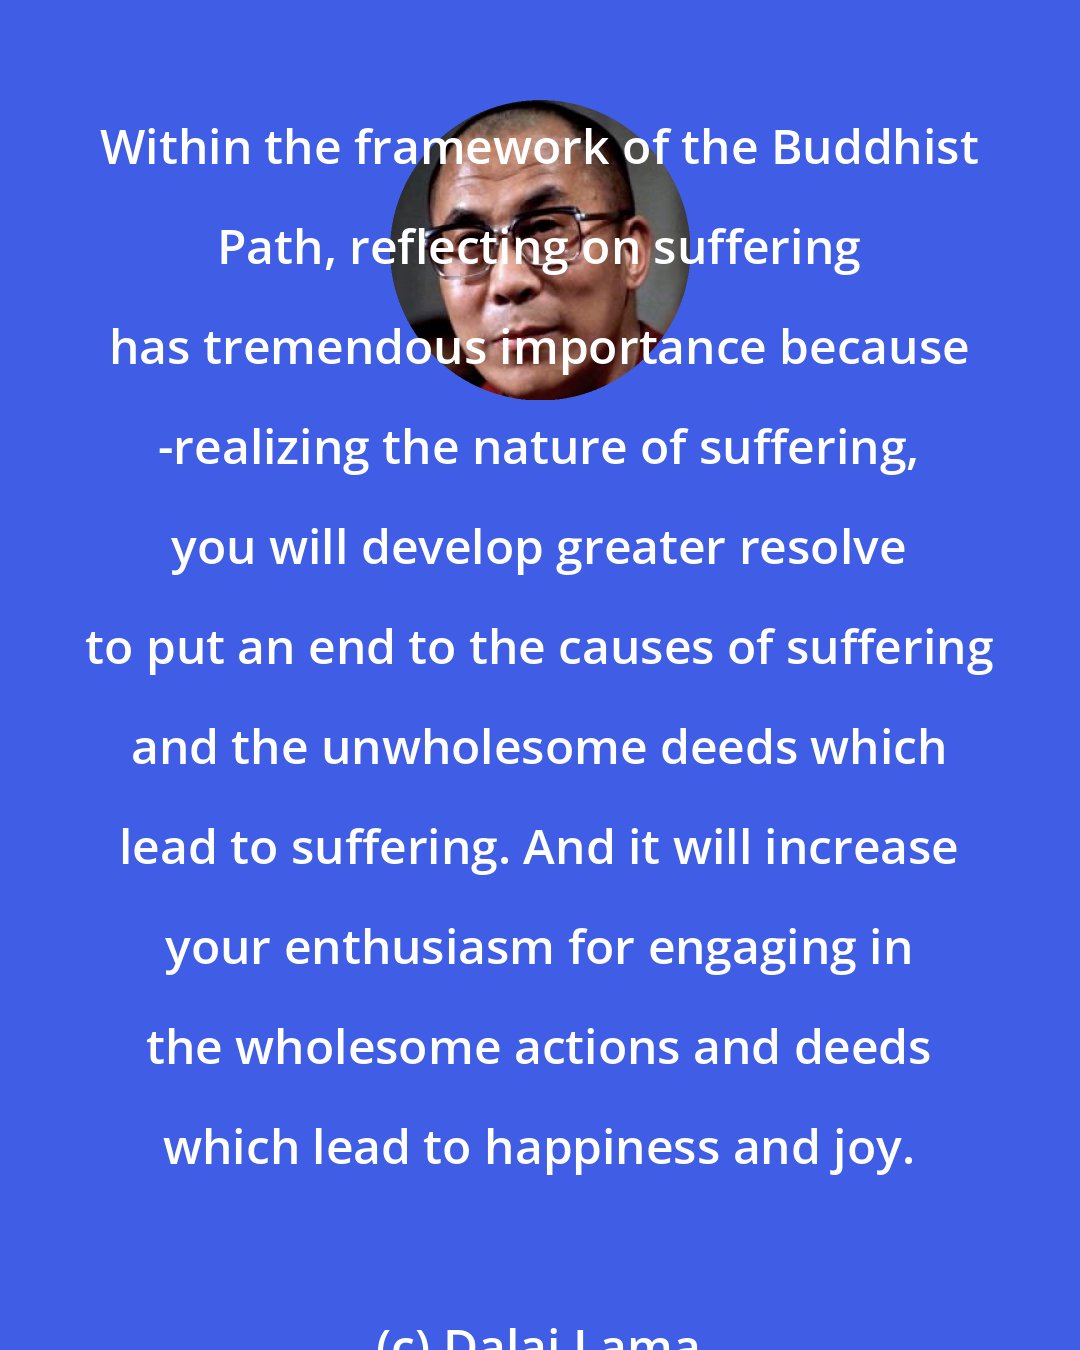 Dalai Lama: Within the framework of the Buddhist Path, reflecting on suffering has tremendous importance because -realizing the nature of suffering, you will develop greater resolve to put an end to the causes of suffering and the unwholesome deeds which lead to suffering. And it will increase your enthusiasm for engaging in the wholesome actions and deeds which lead to happiness and joy.